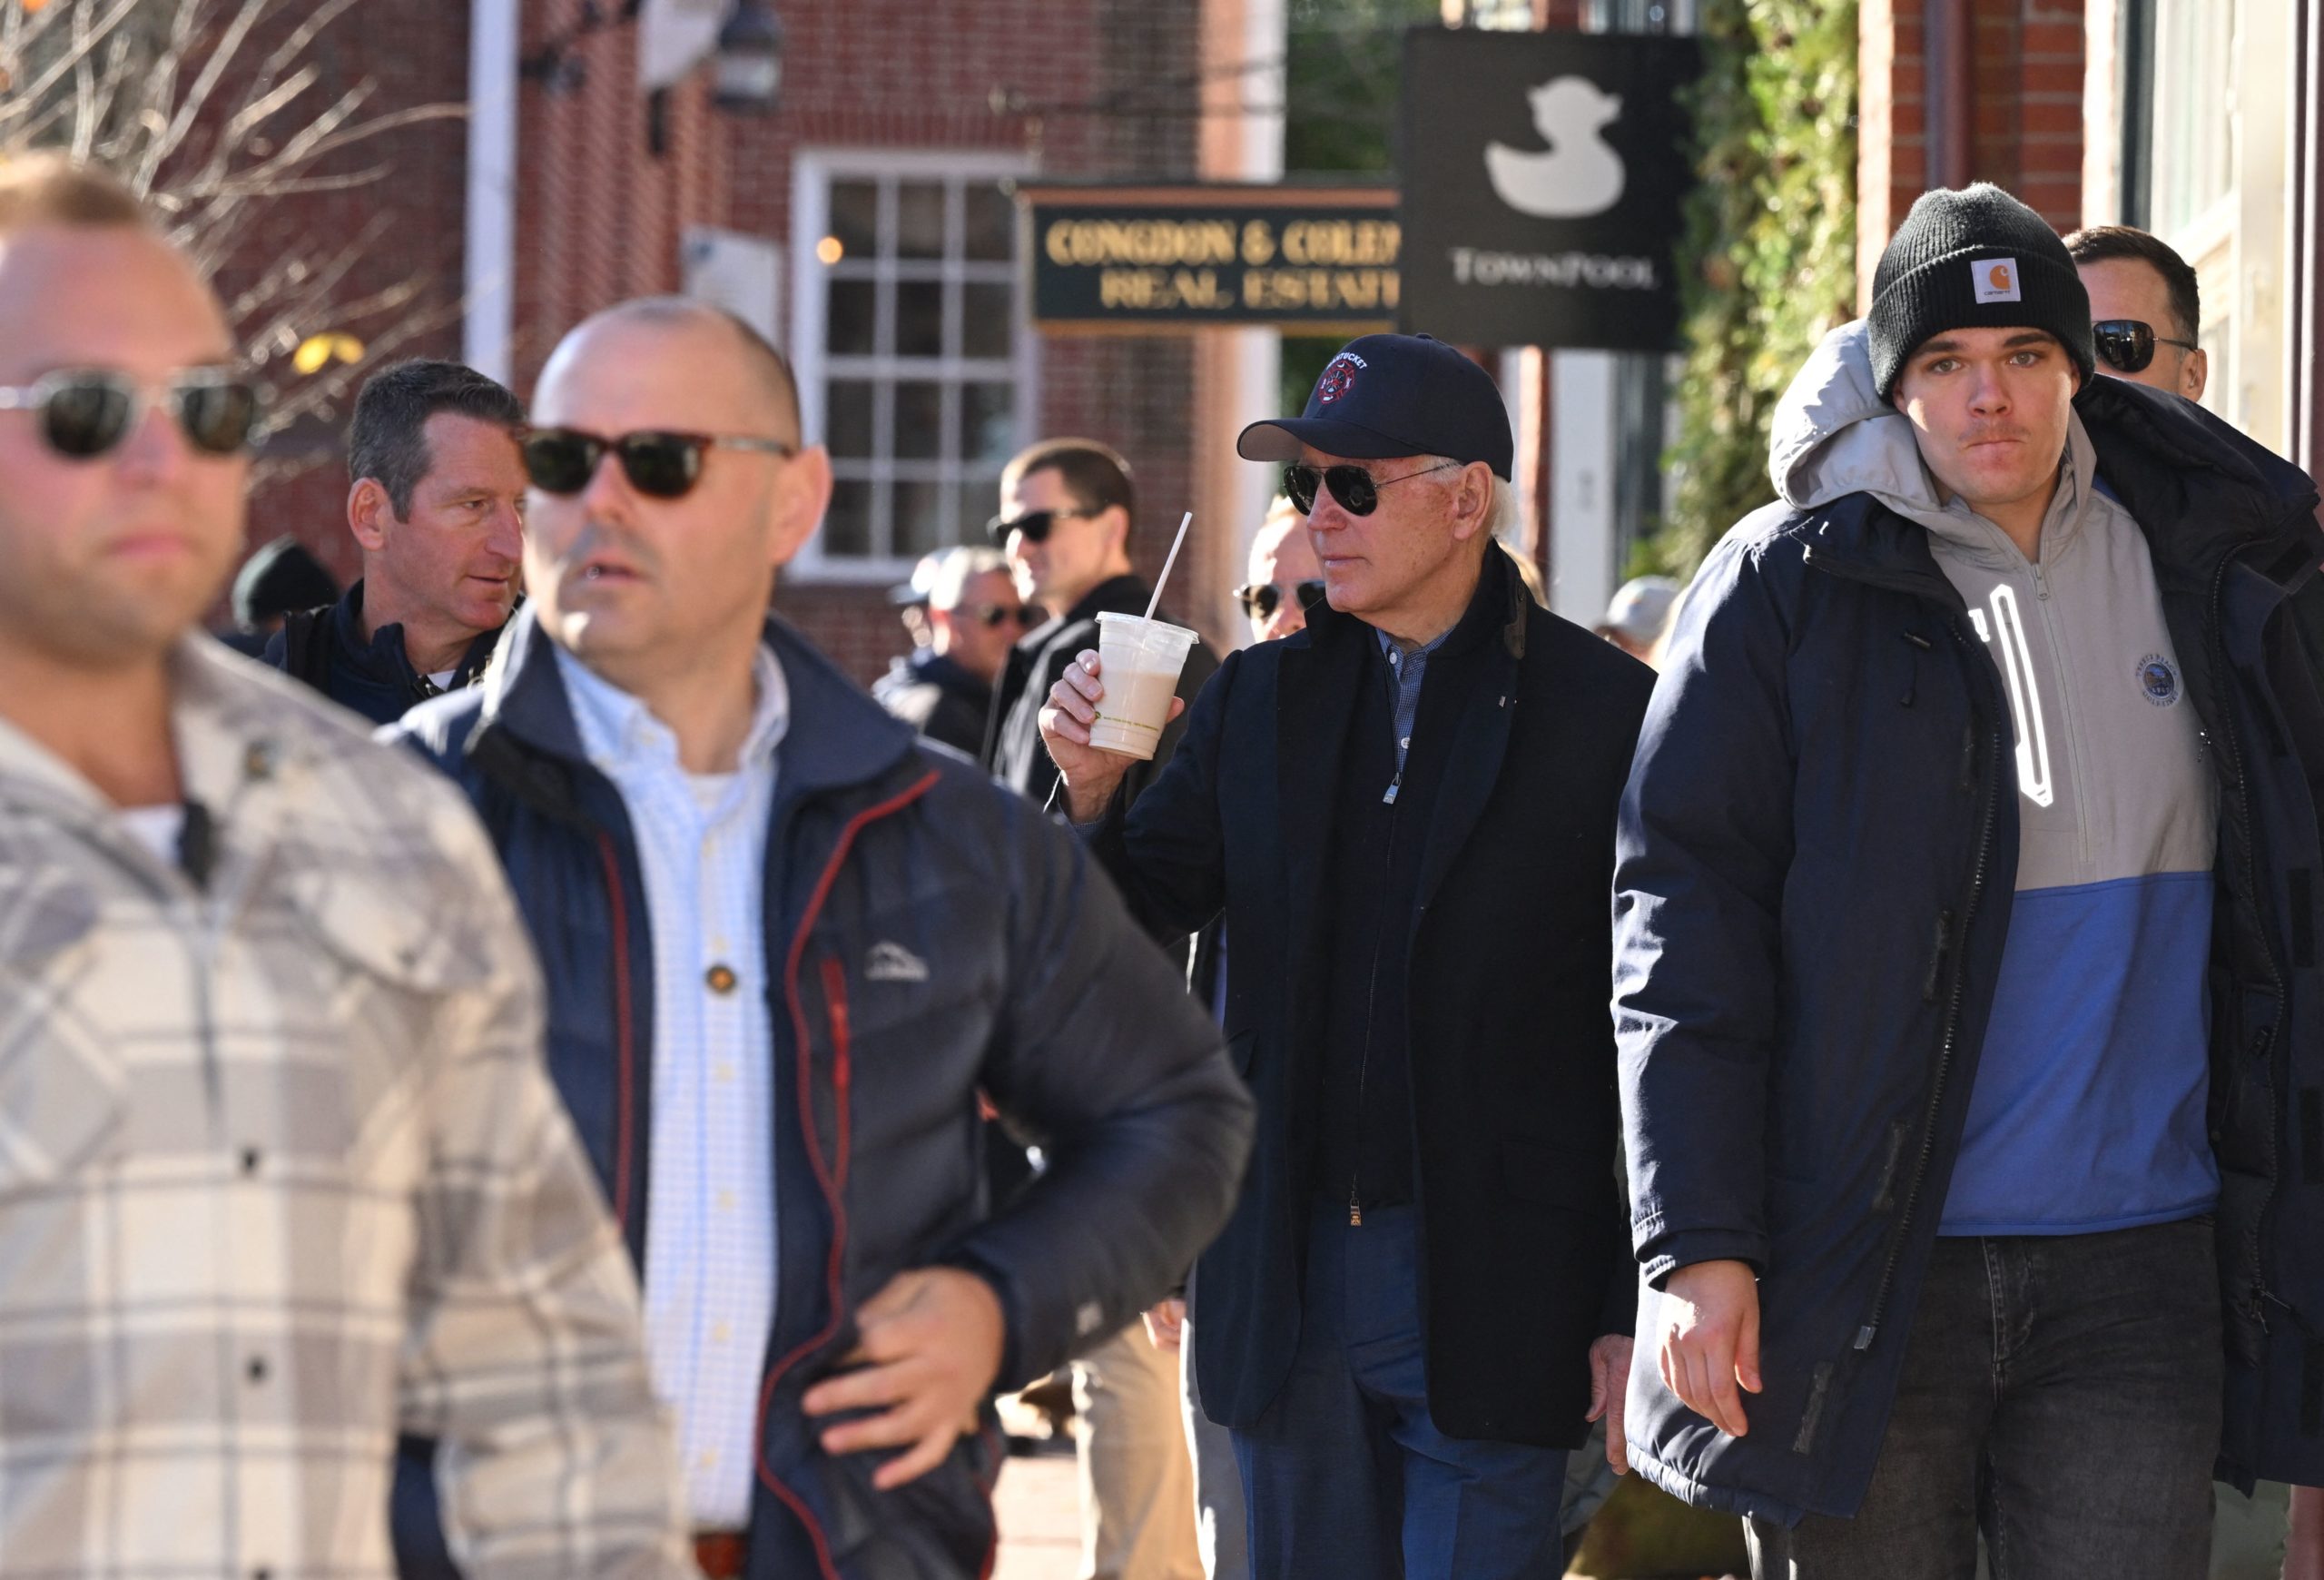 US President Joe Biden (C) shops in Nantucket, Massachusetts, on November 26, 2022, during the observance of Small Business Saturday. (Photo by MANDEL NGAN/AFP via Getty Images)